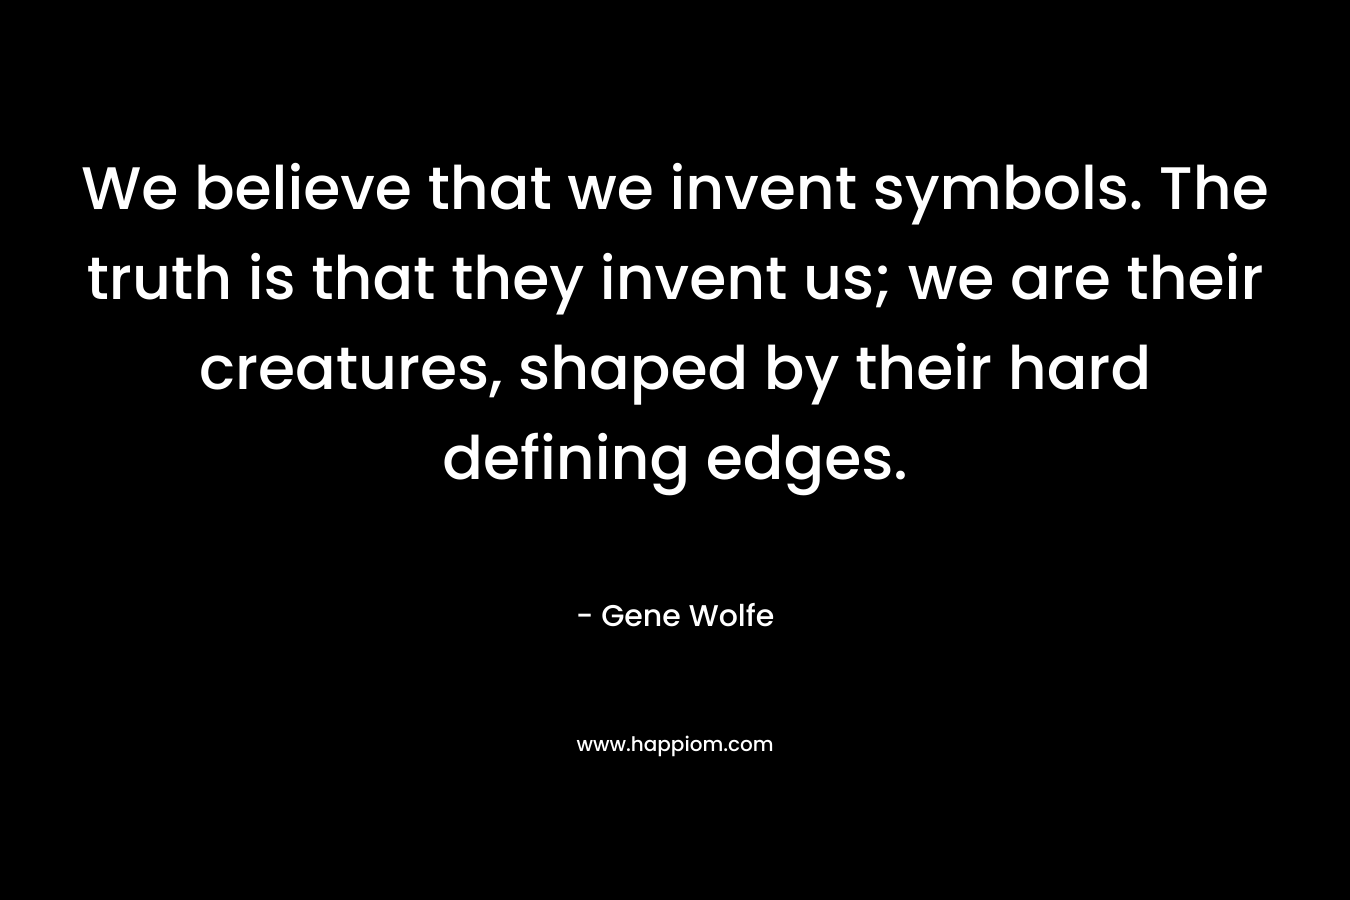 We believe that we invent symbols. The truth is that they invent us; we are their creatures, shaped by their hard defining edges.